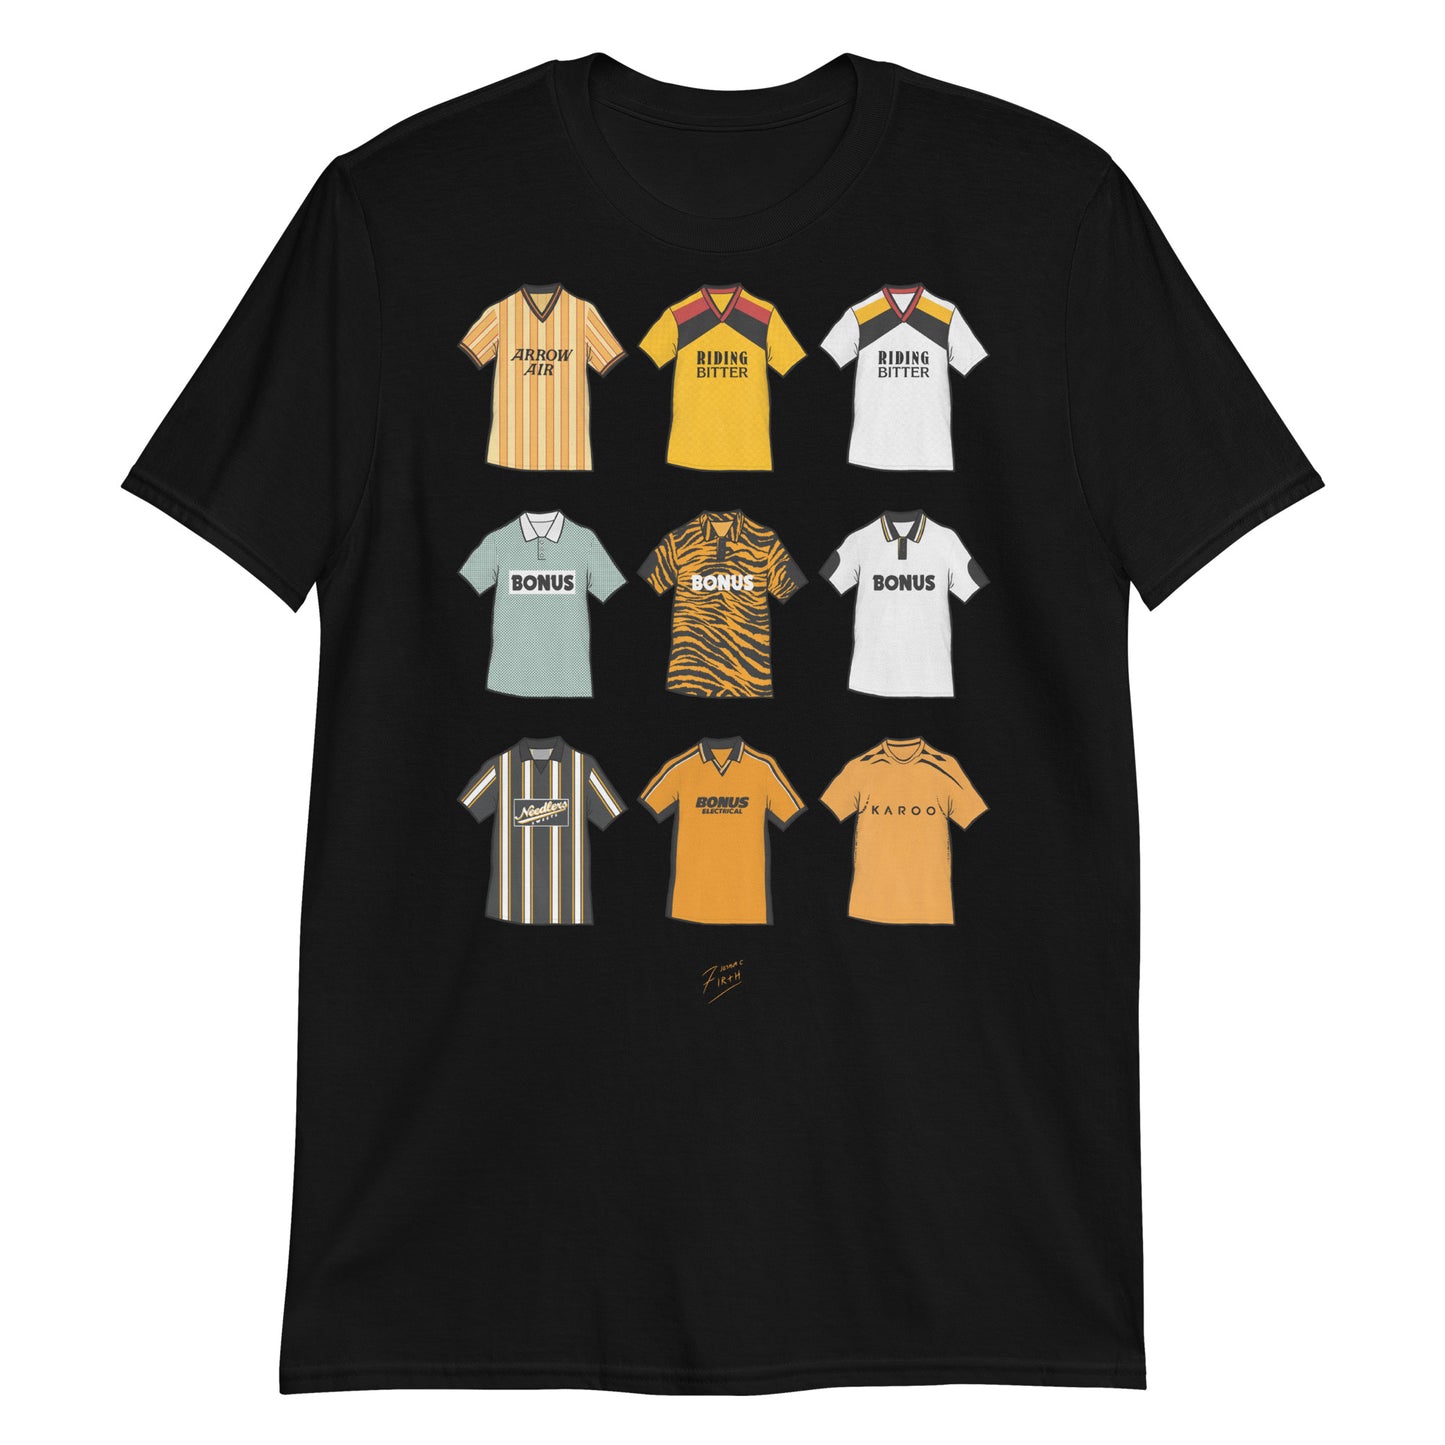 Black Hull City themed football t-shirt featuring artwork of some of the most iconic jerseys in the history of the club